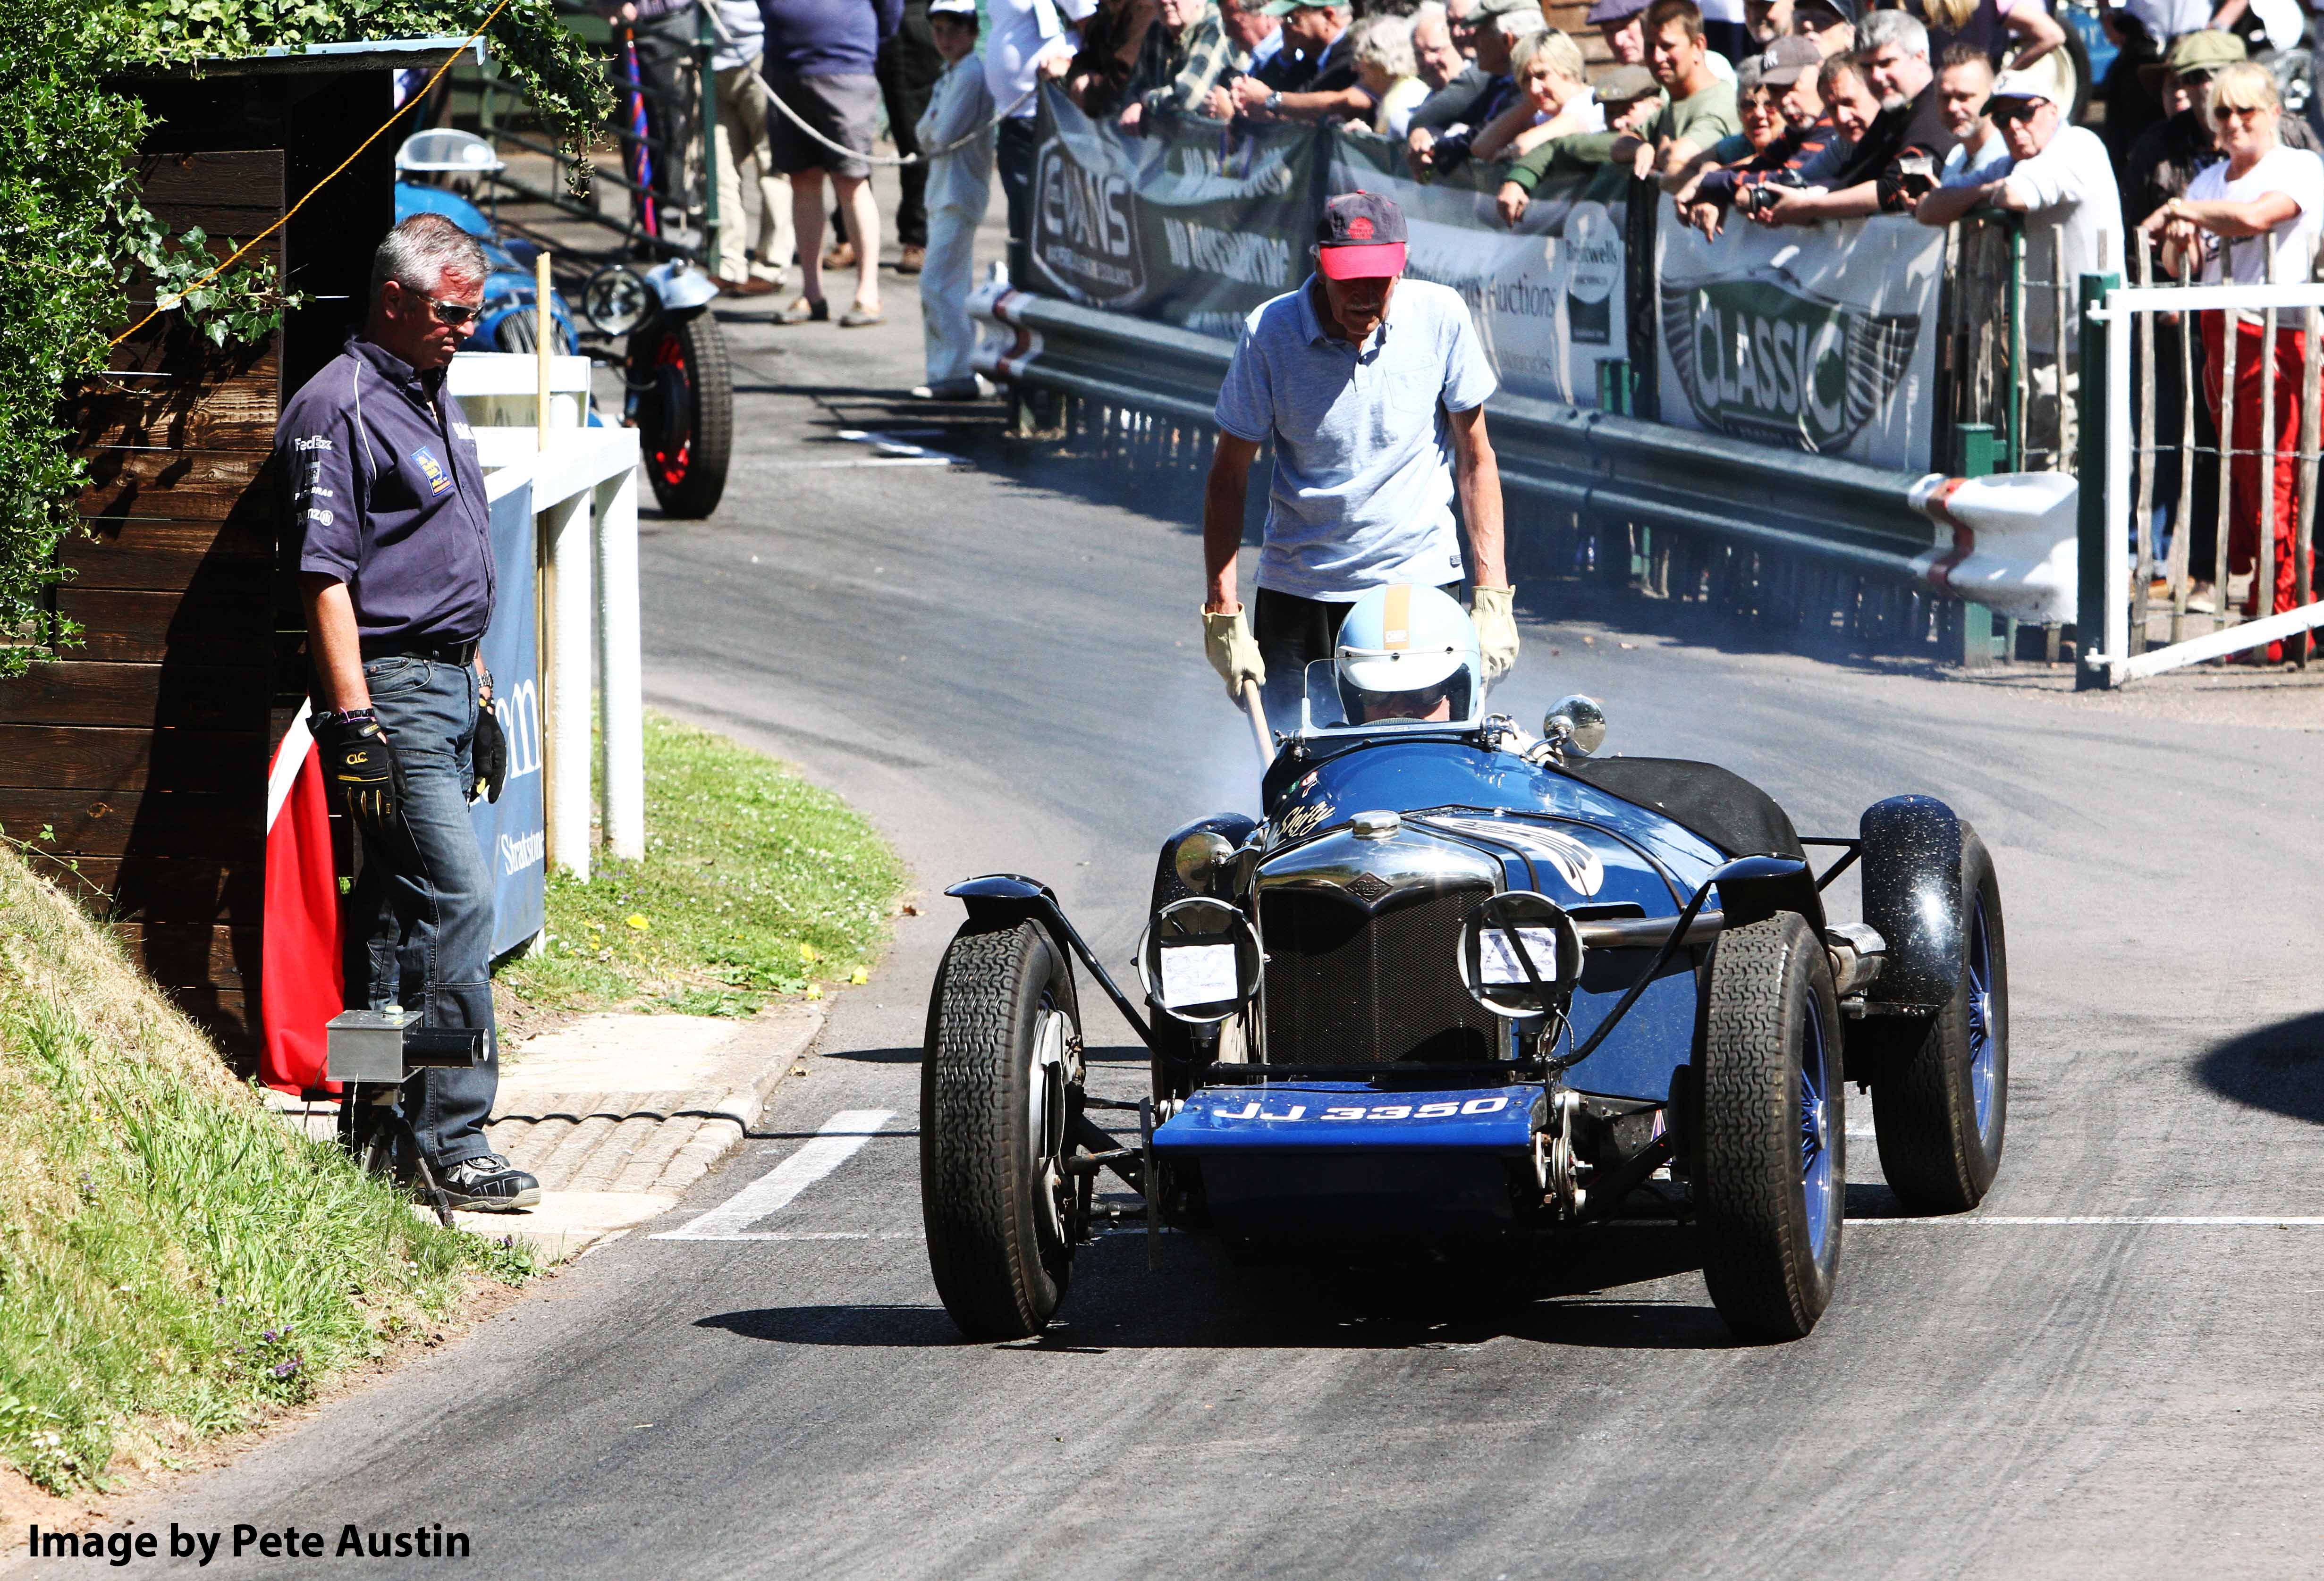 VSCC Shelsley Walsh Photo Gallery Now Live cover